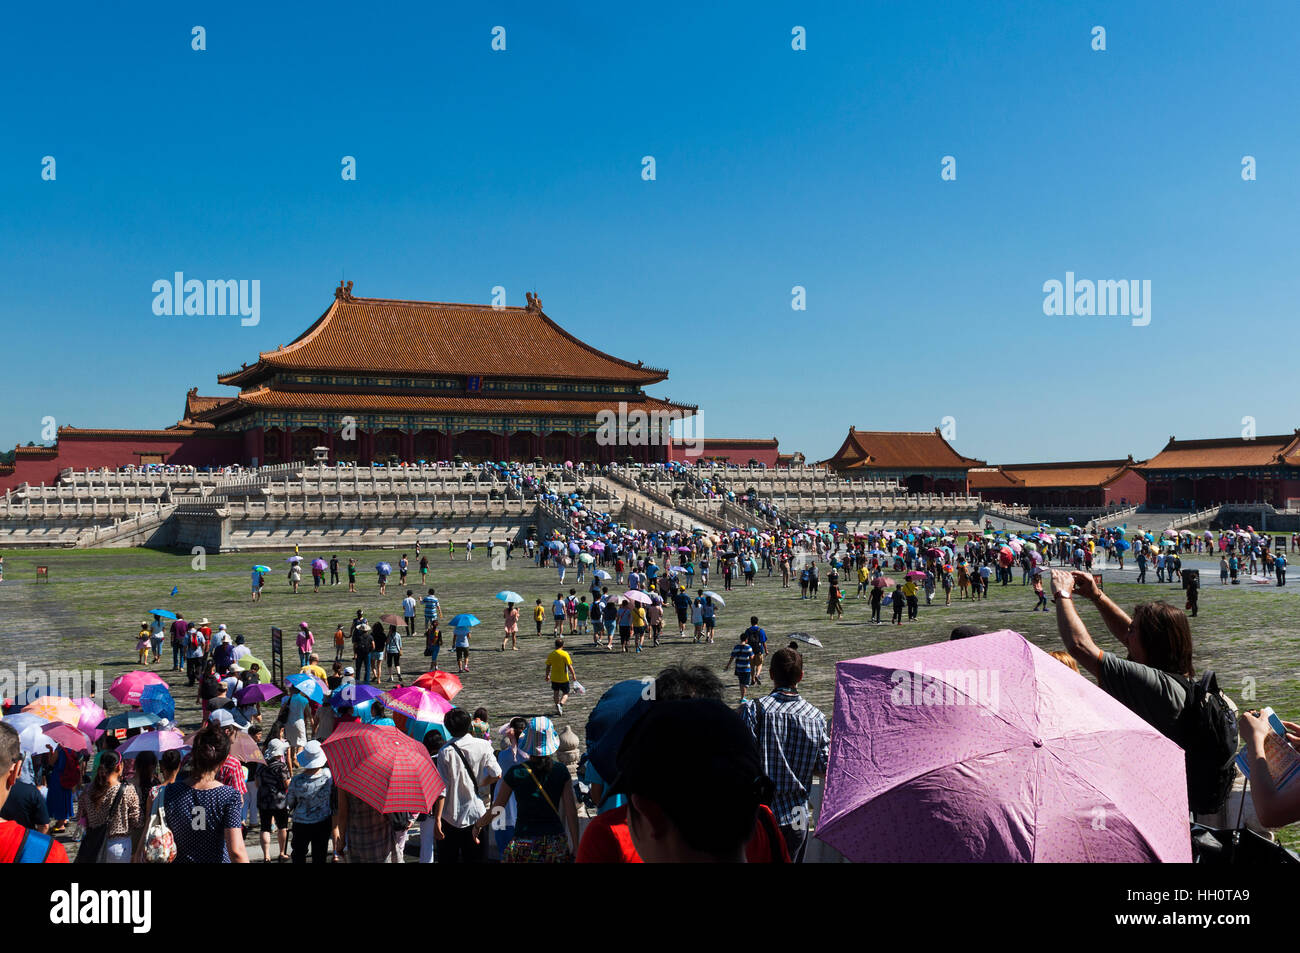 Beijing, China - July 29, 2012: Visitors entering in the Forbidden City in Beijing, China. Stock Photo